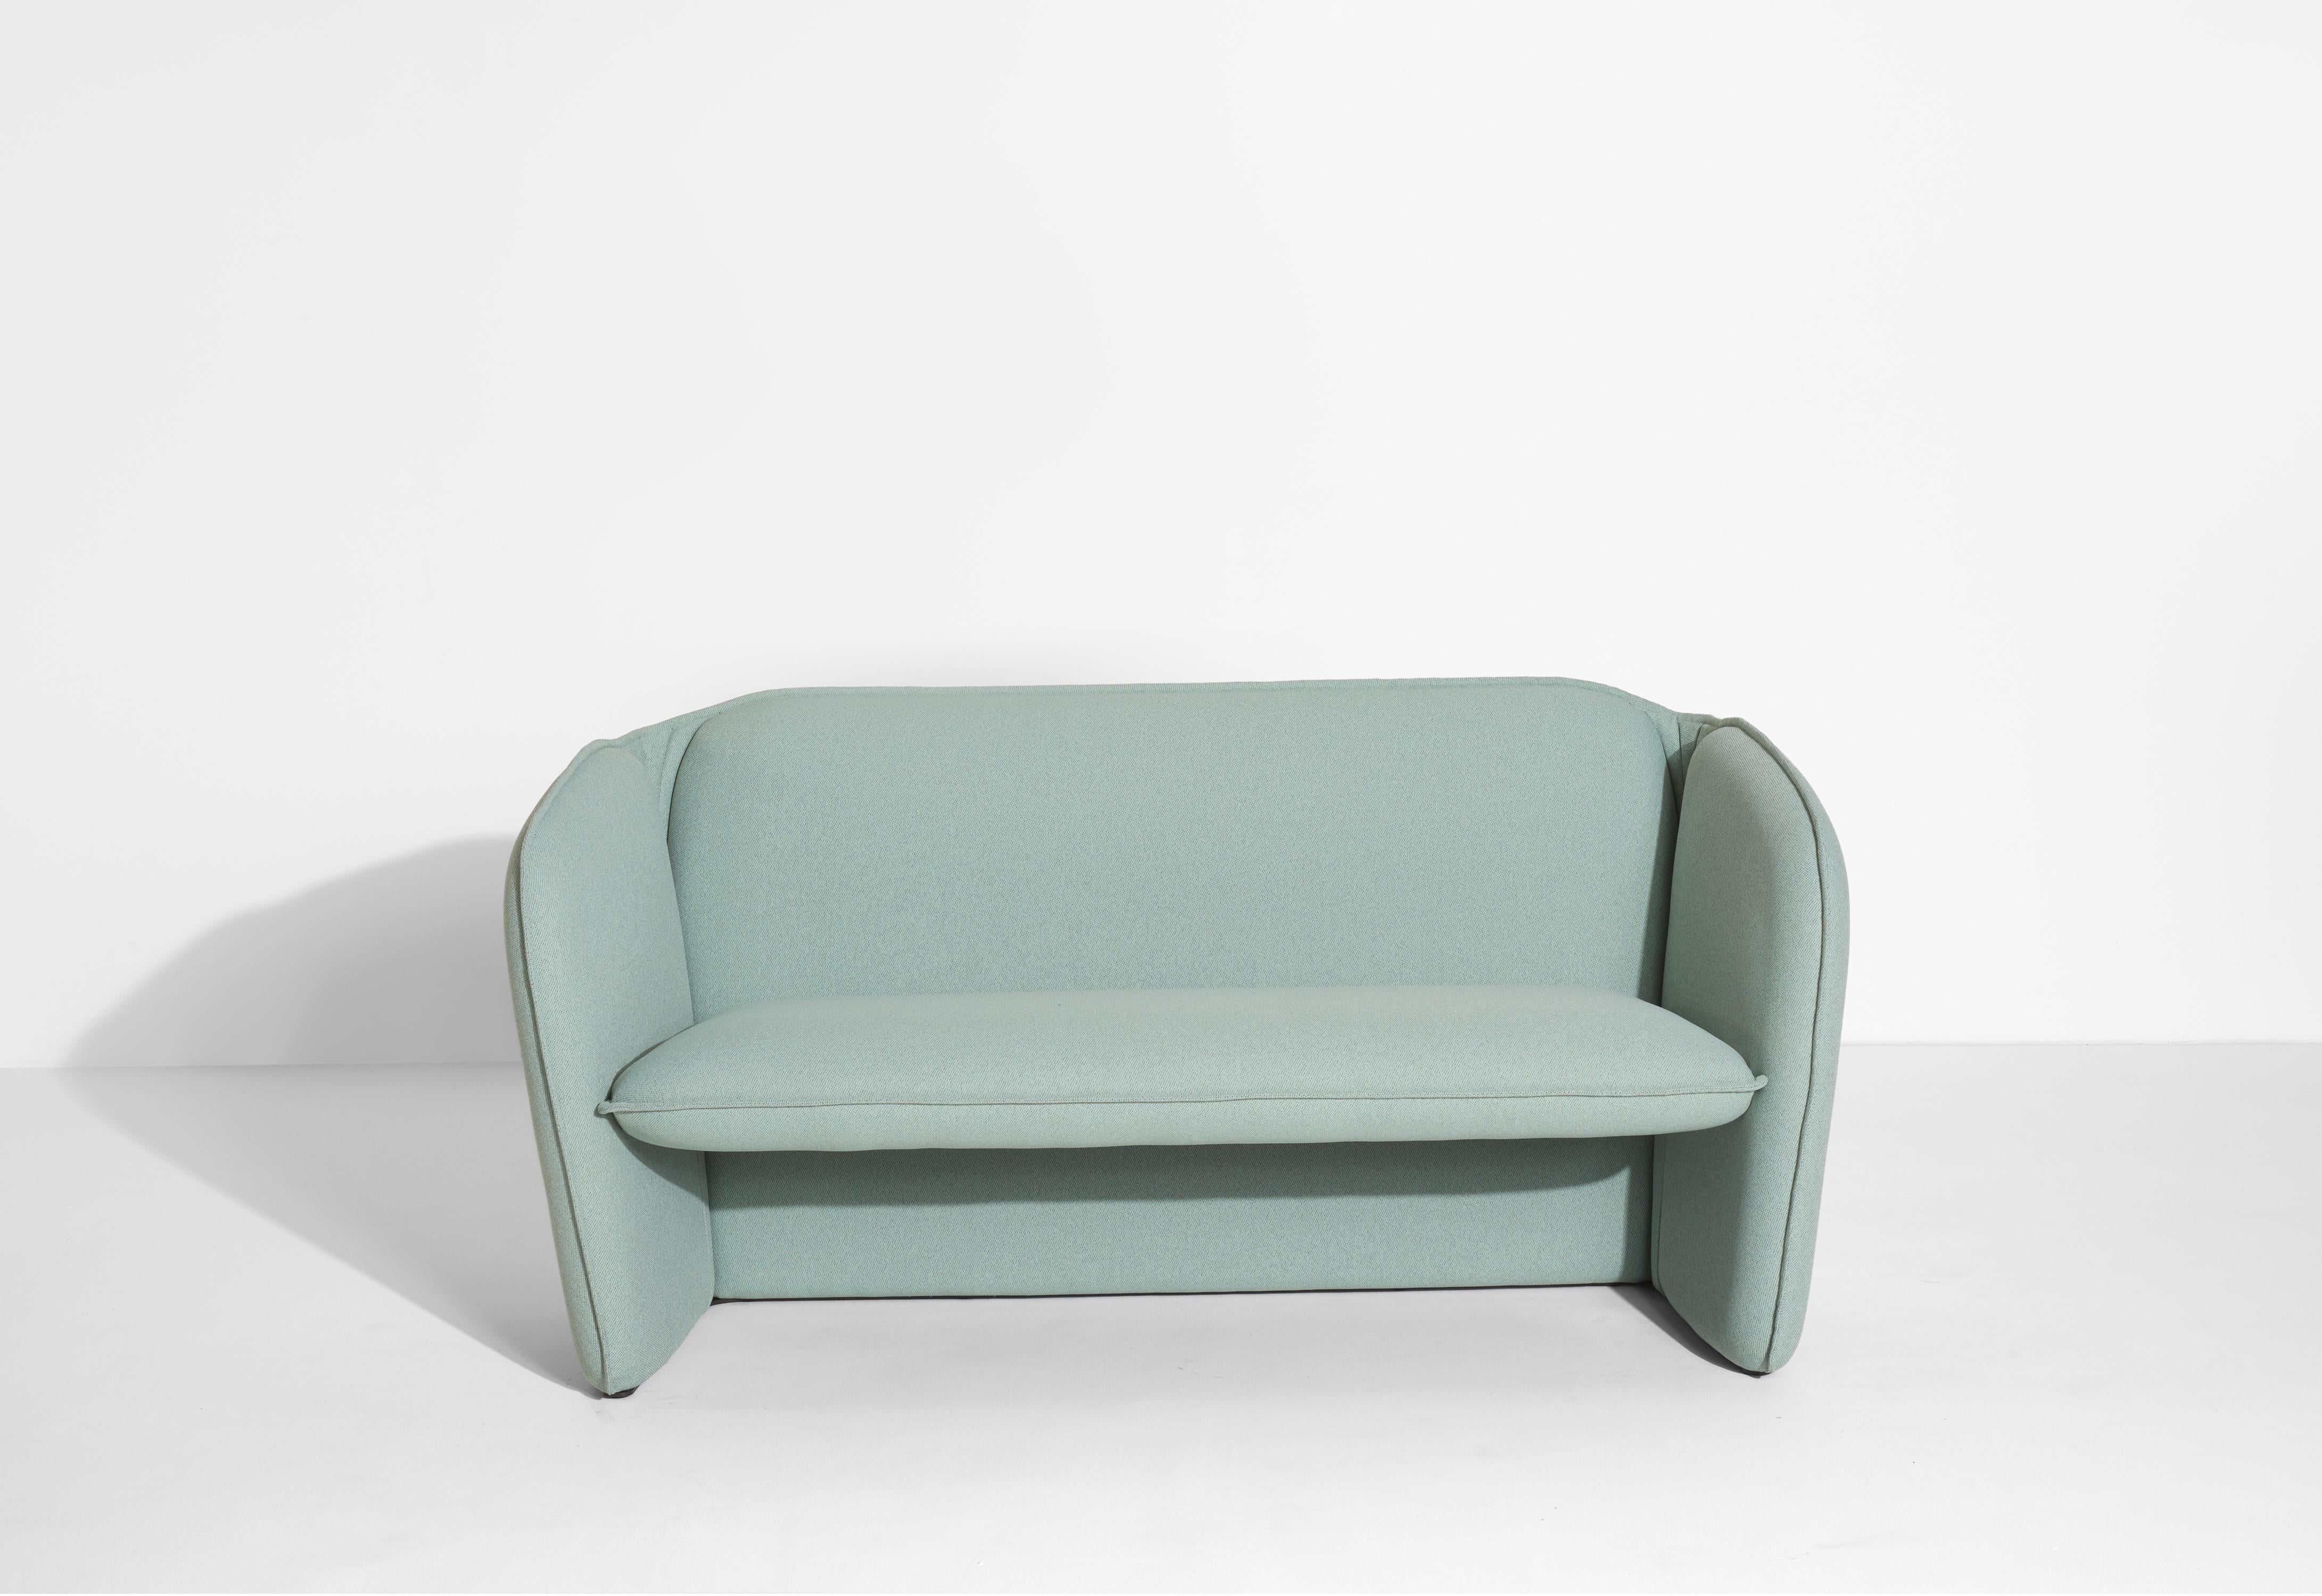 Contemporary Petite Friture Lily Sofa in Light Blue by Färg & Blanche, 2022 For Sale